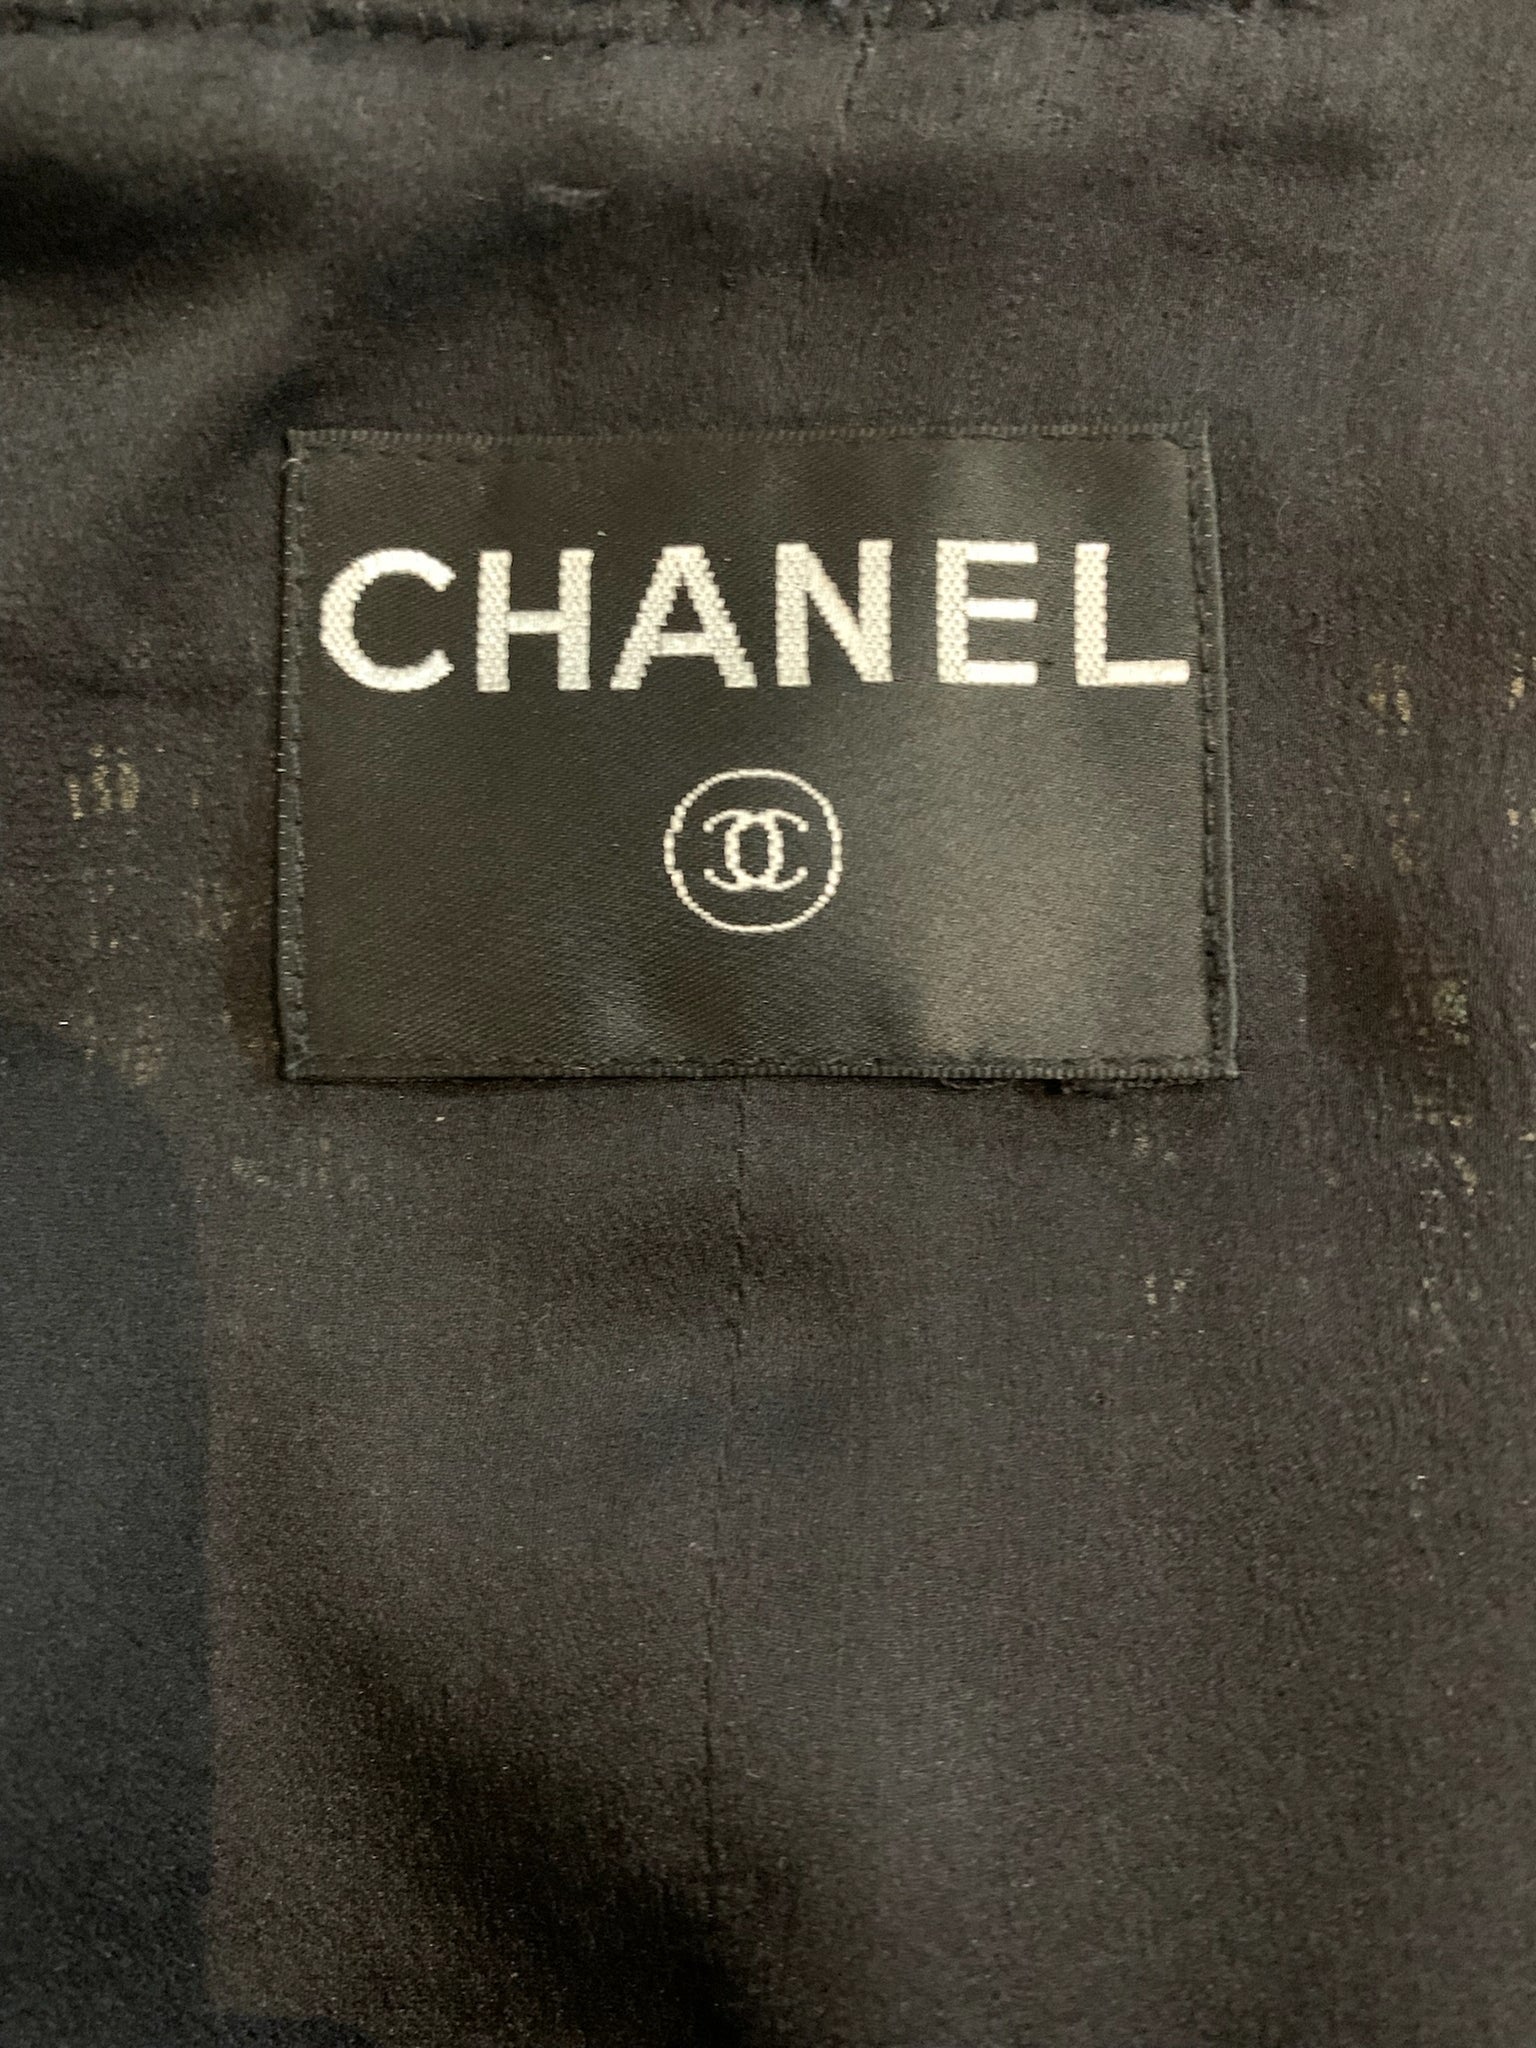 Chanel 2000s Rag Doll Textured Multi-Color Jacket LABEL 6 of 6